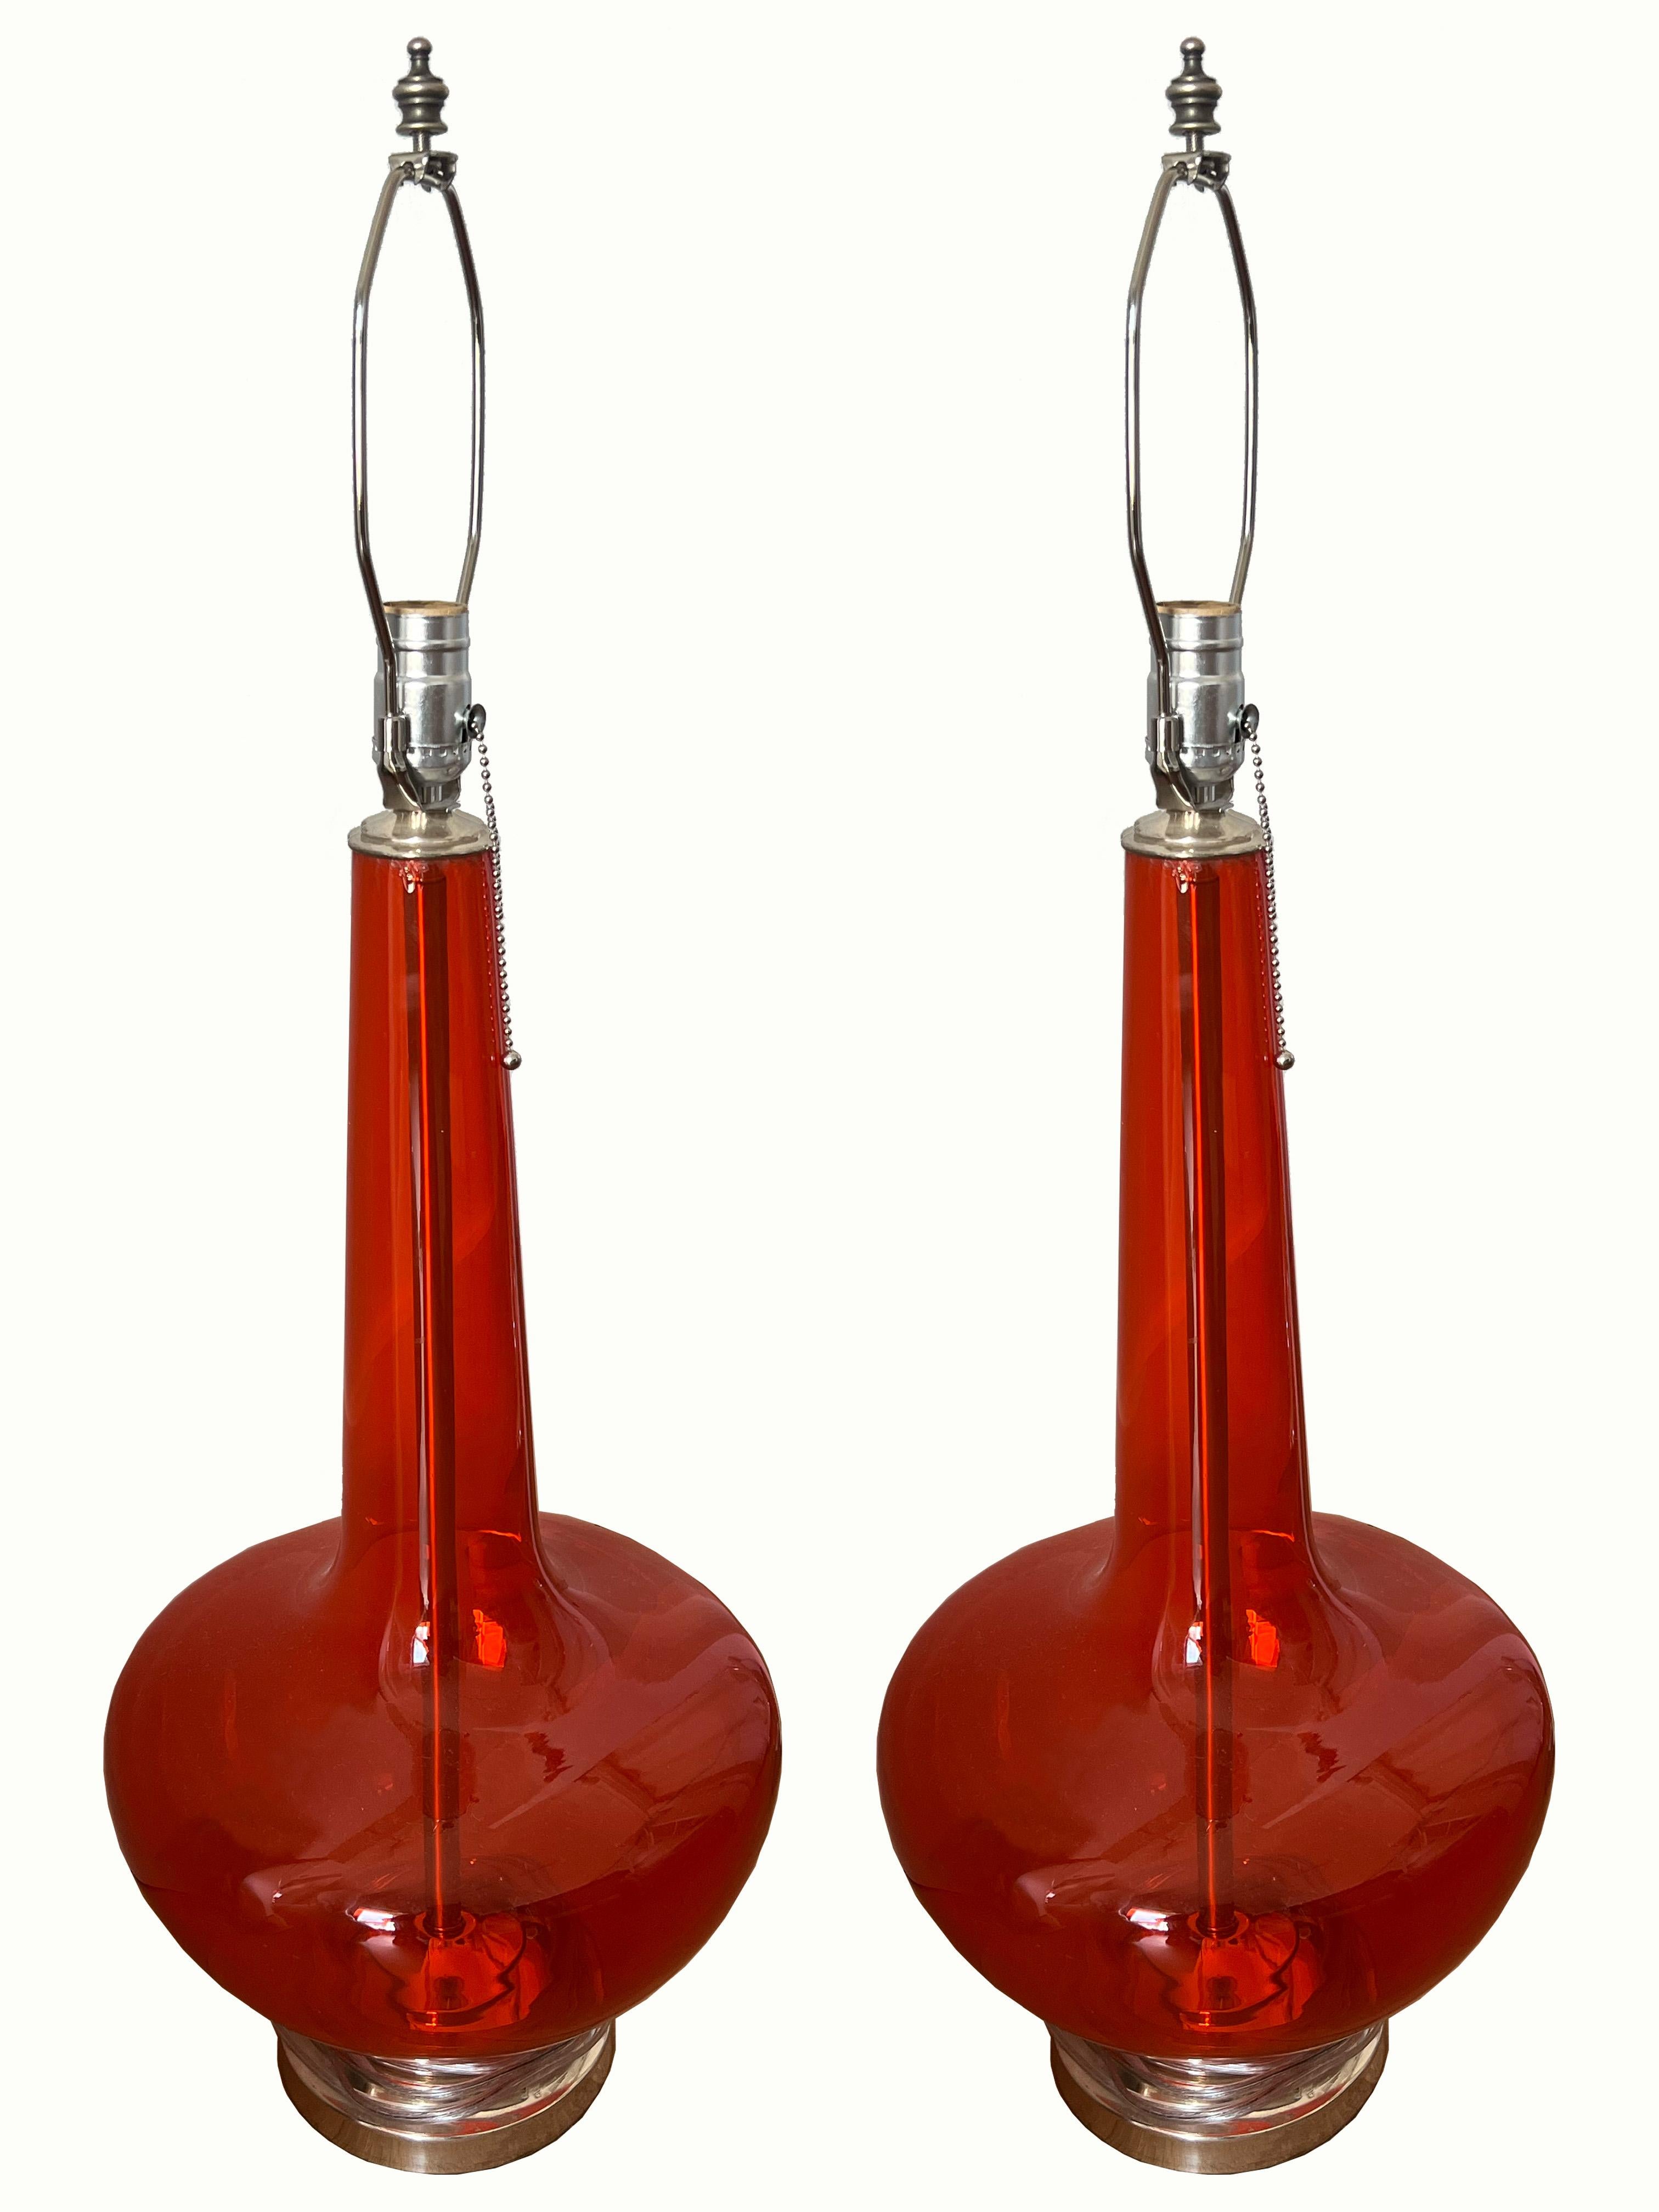 Pair of Vintage Murano Lamps In Excellent Condition For Sale In Shelter Island, NY